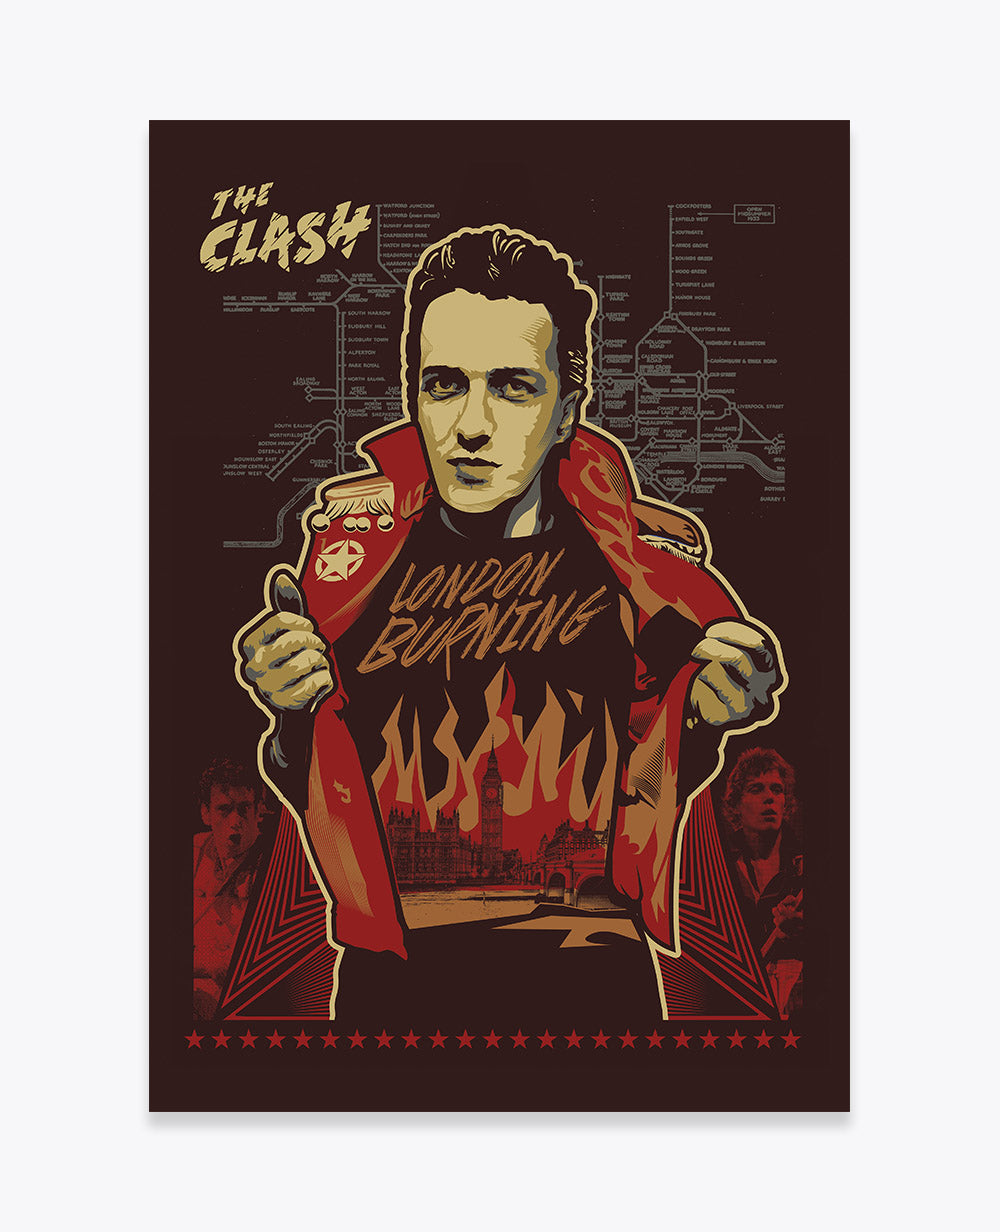 THE CLASH POSTER